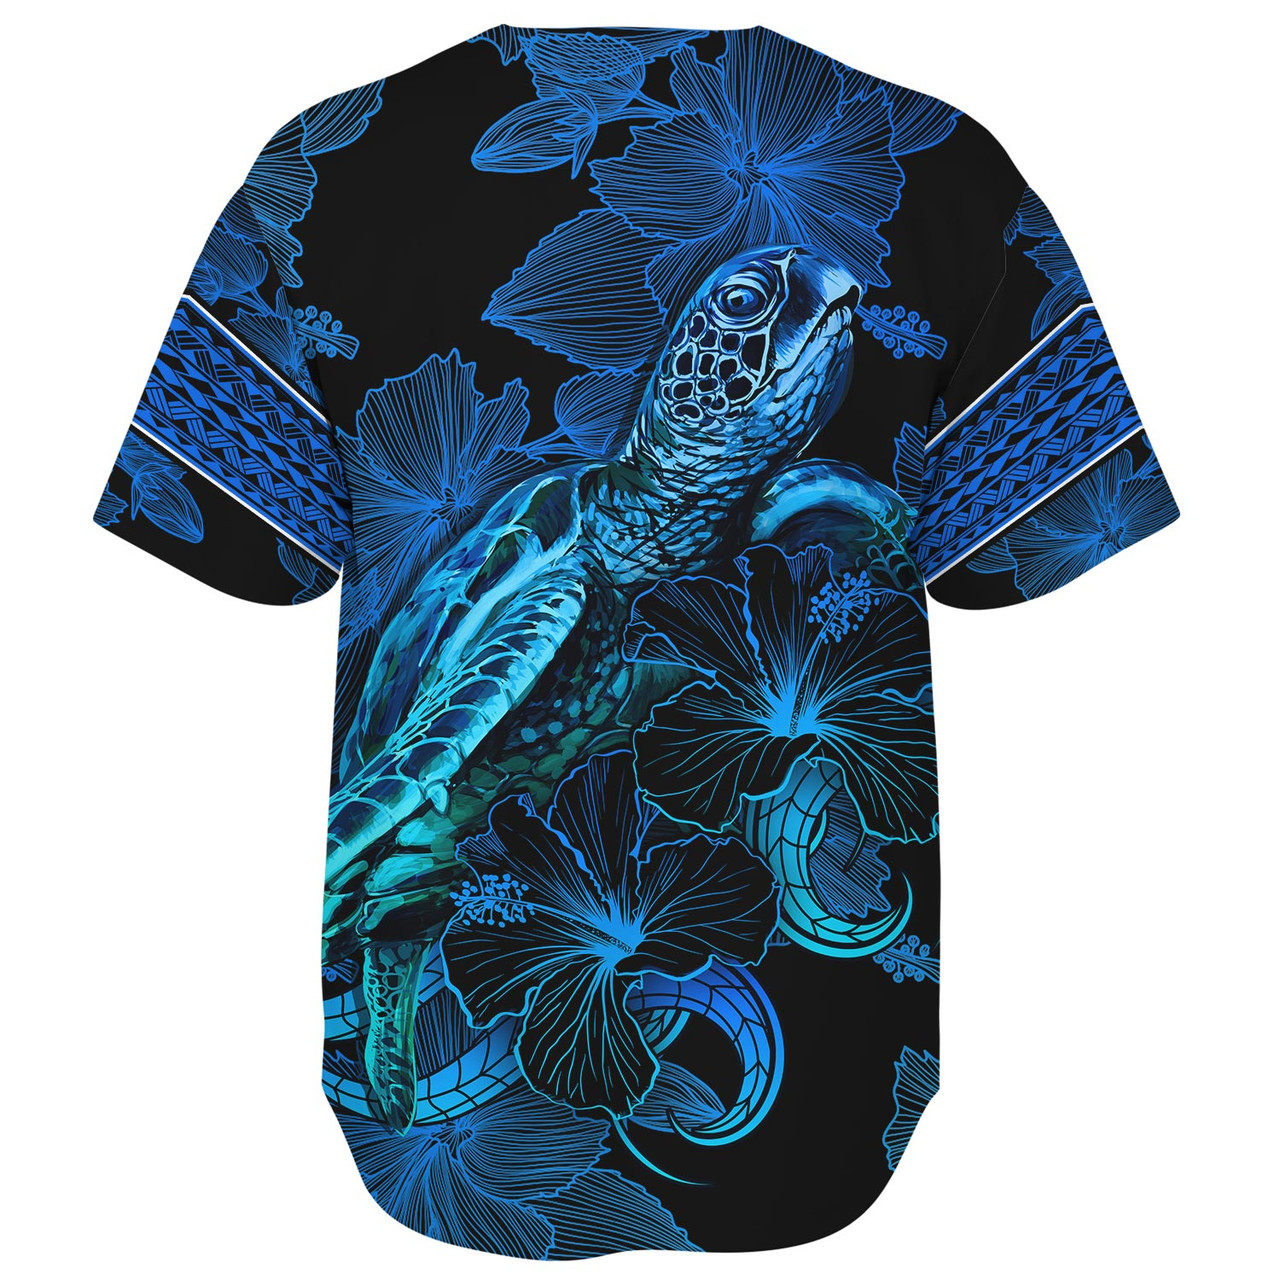 Chuuk State Baseball Shirt Sea Turtle With Blooming Hibiscus Flowers Tribal Blue